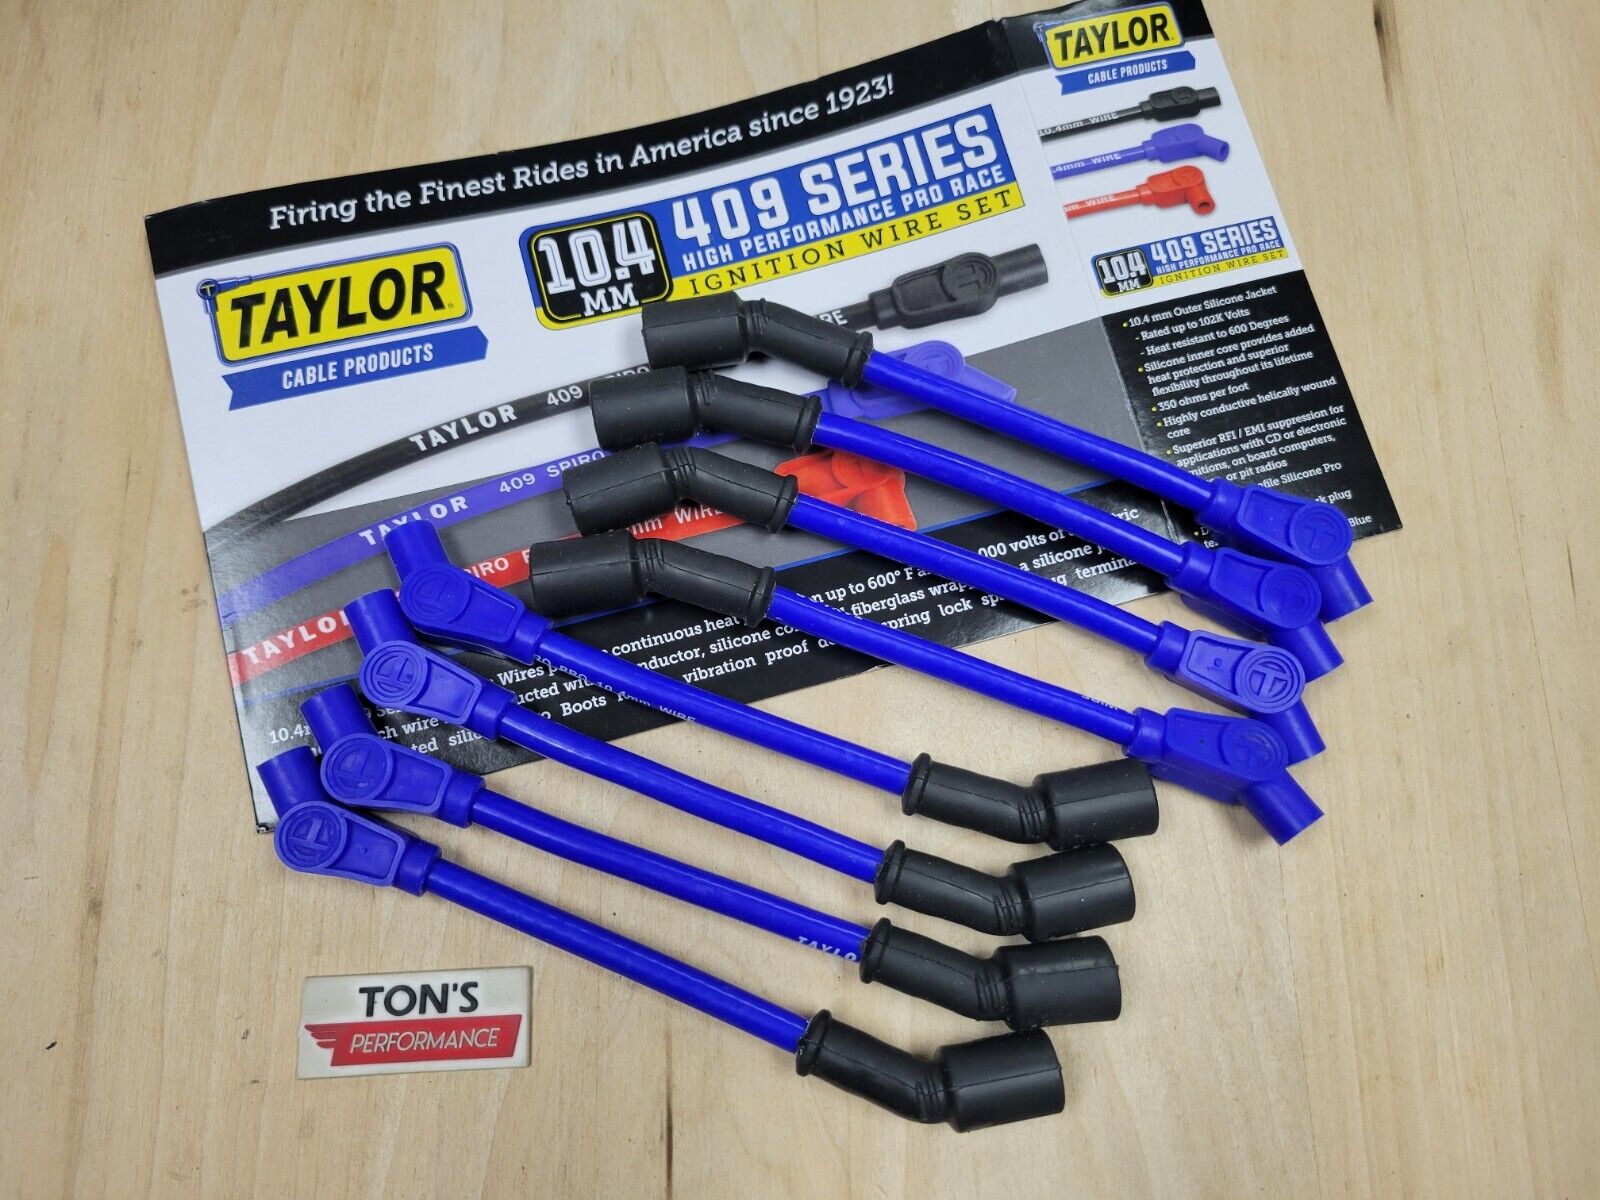 Taylor Spark Plug Wire Set 79613 409 Pro Race 10.4mm Blue 135 for Chevy LS Cars